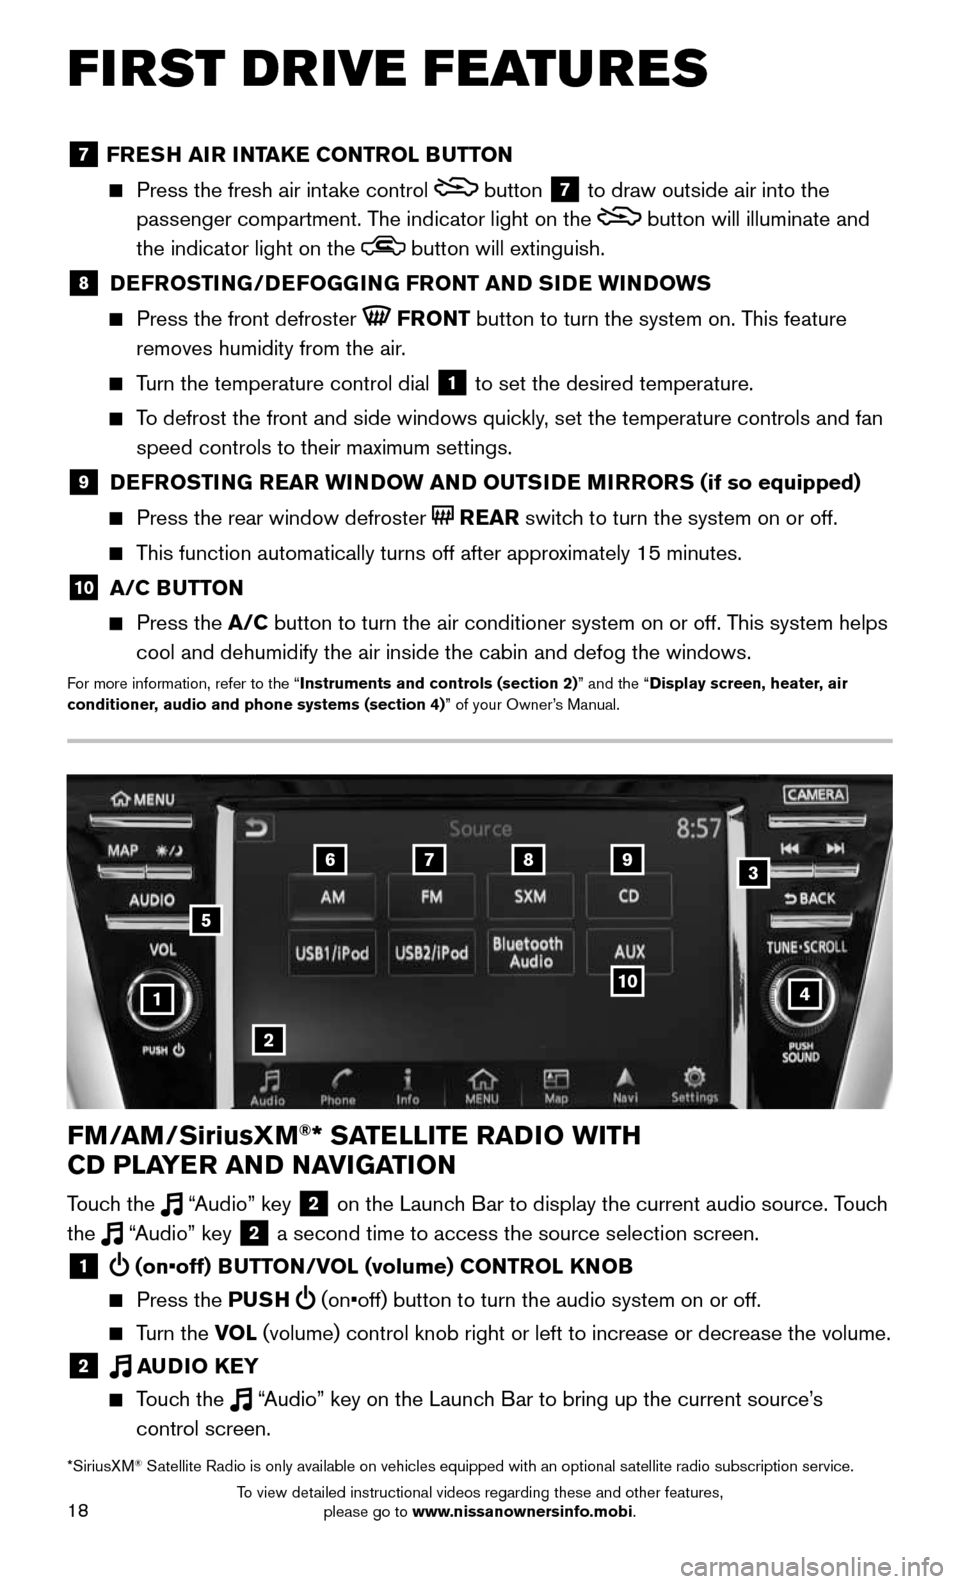 NISSAN MURANO HYBRID 2016 3.G Quick Reference Guide 18
FIRST DRIVE FEATURES
4
6789
10
2
3
1
FM/AM/SiriusXM®* SATELLITE RADIO WITH  
CD PLAYER AND NAVIGATION
Touch the  “Audio” key 2  on the Launch Bar to display the current audio source. Touch 
th